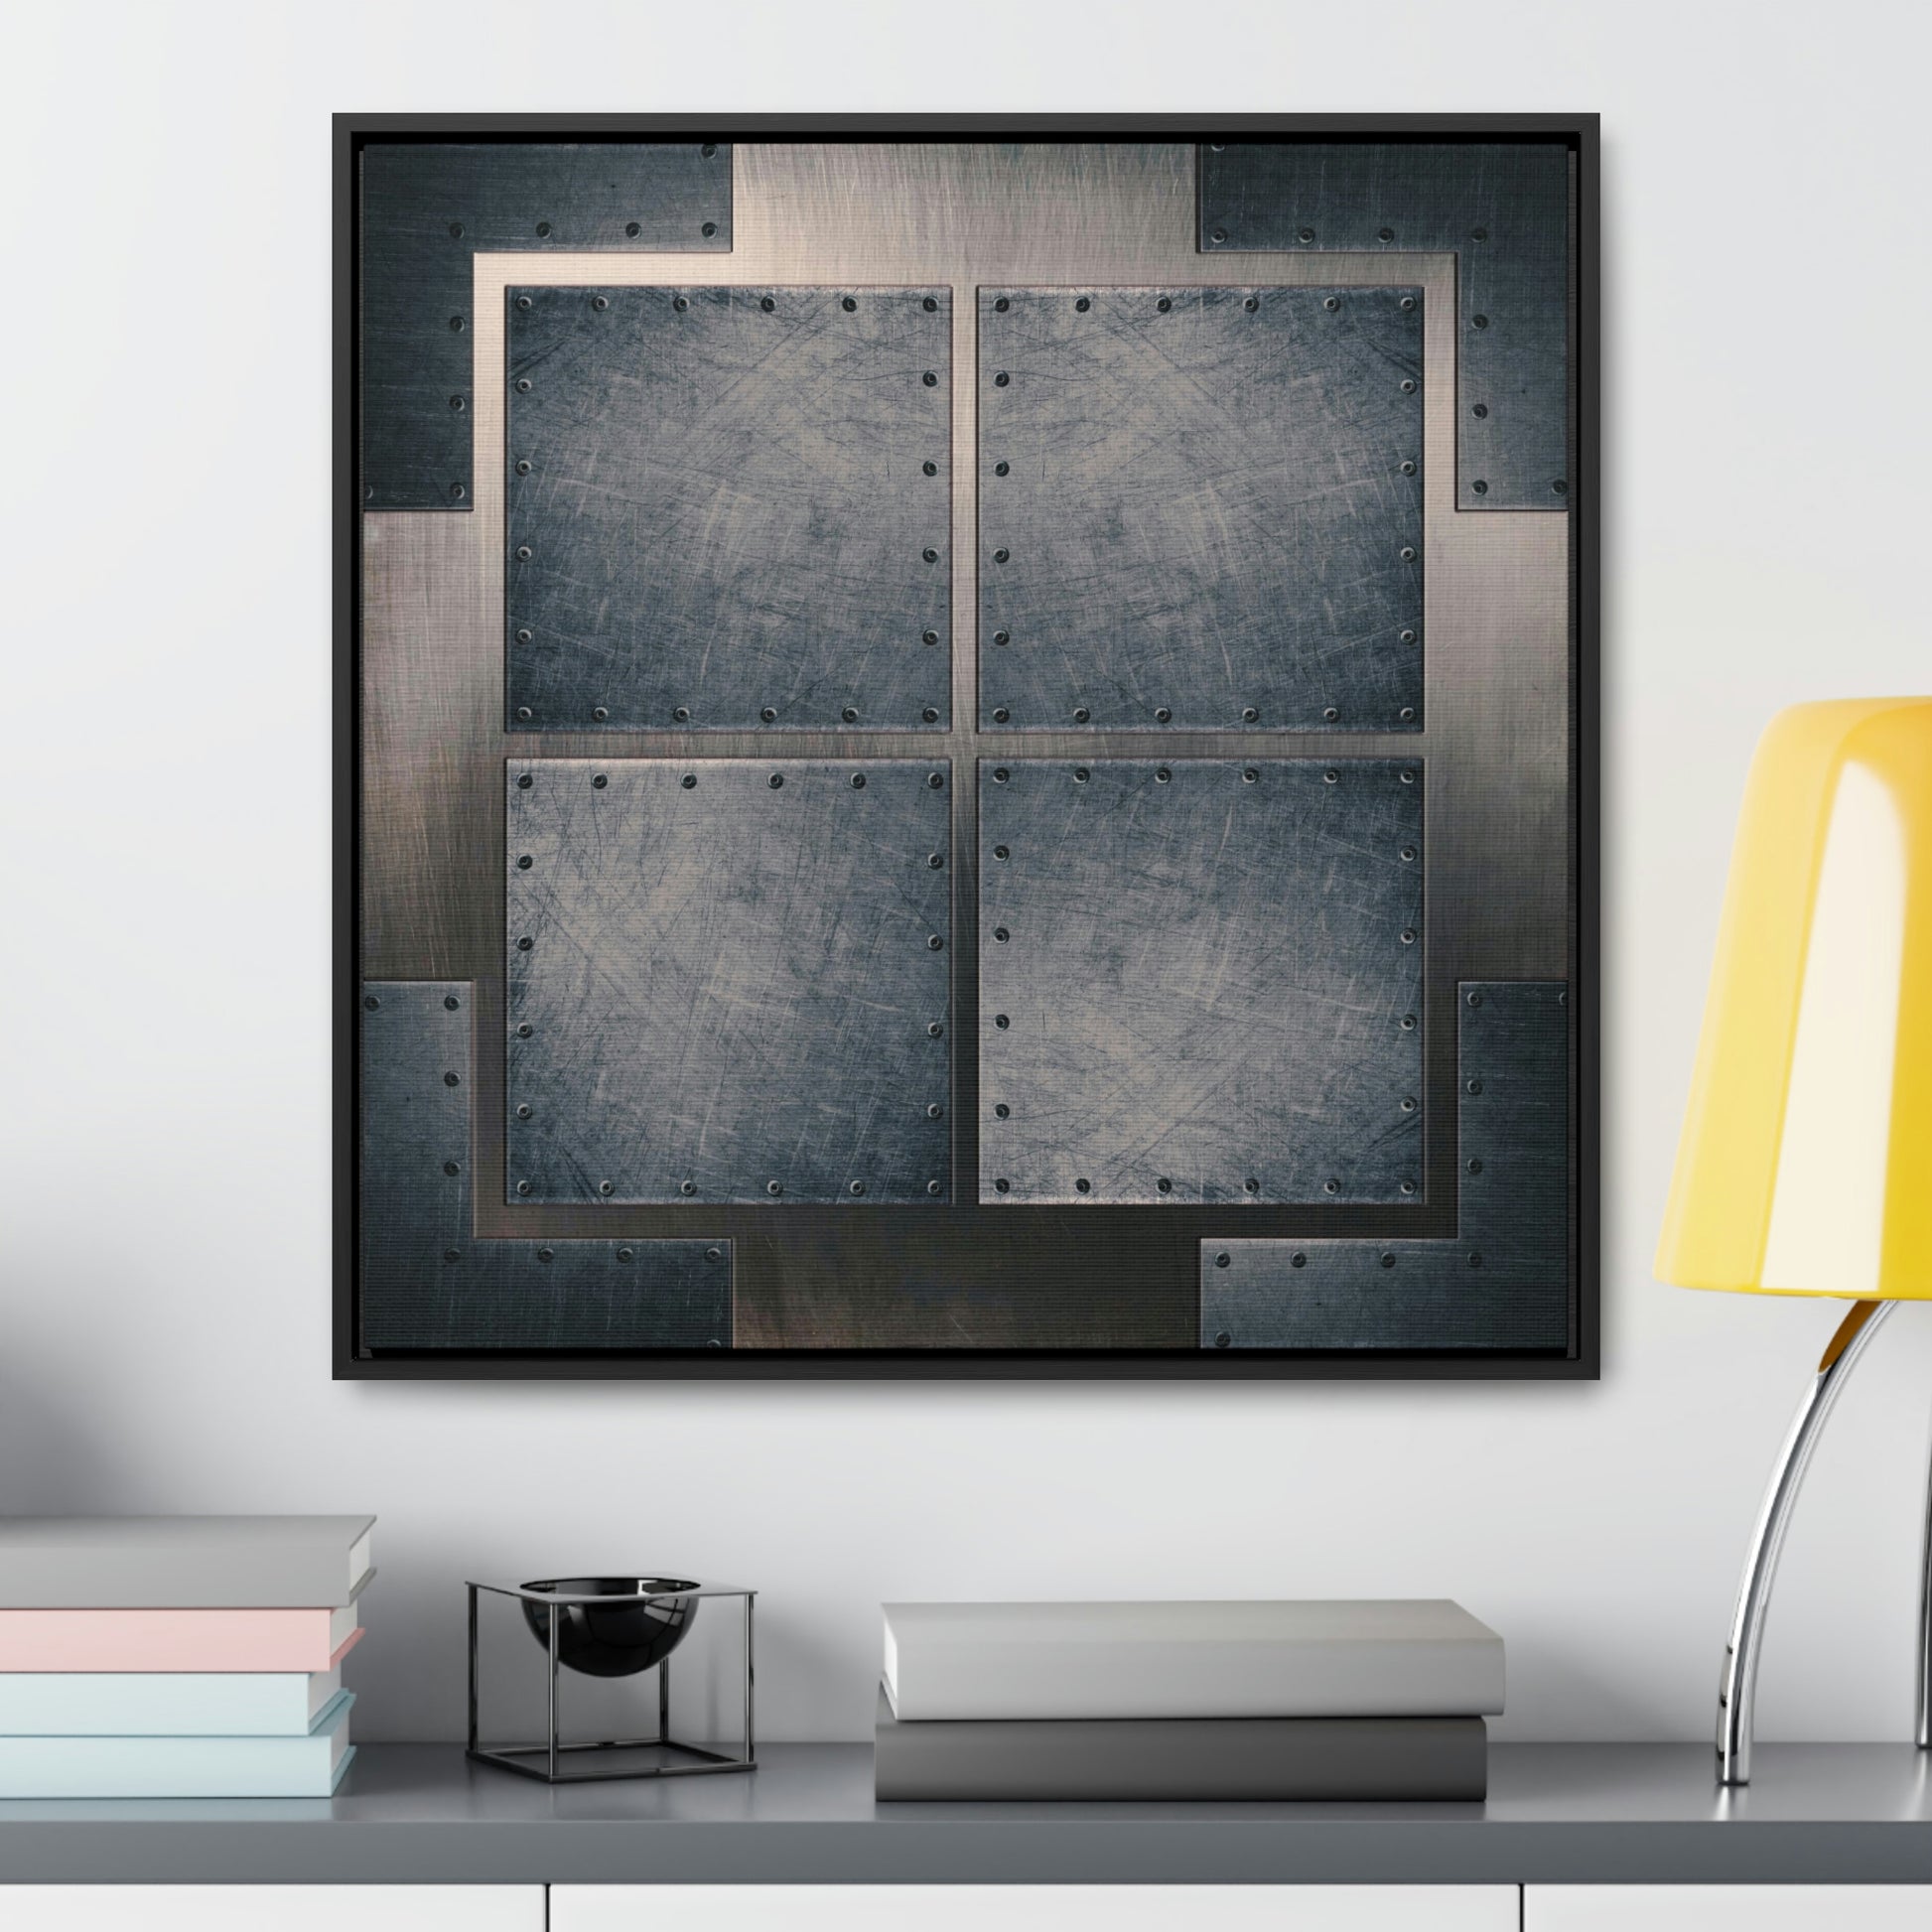 Industrial Themed Wall Decor - Distressed Steel Sheets Print on Canvas in a Floating Frame hung on white wall